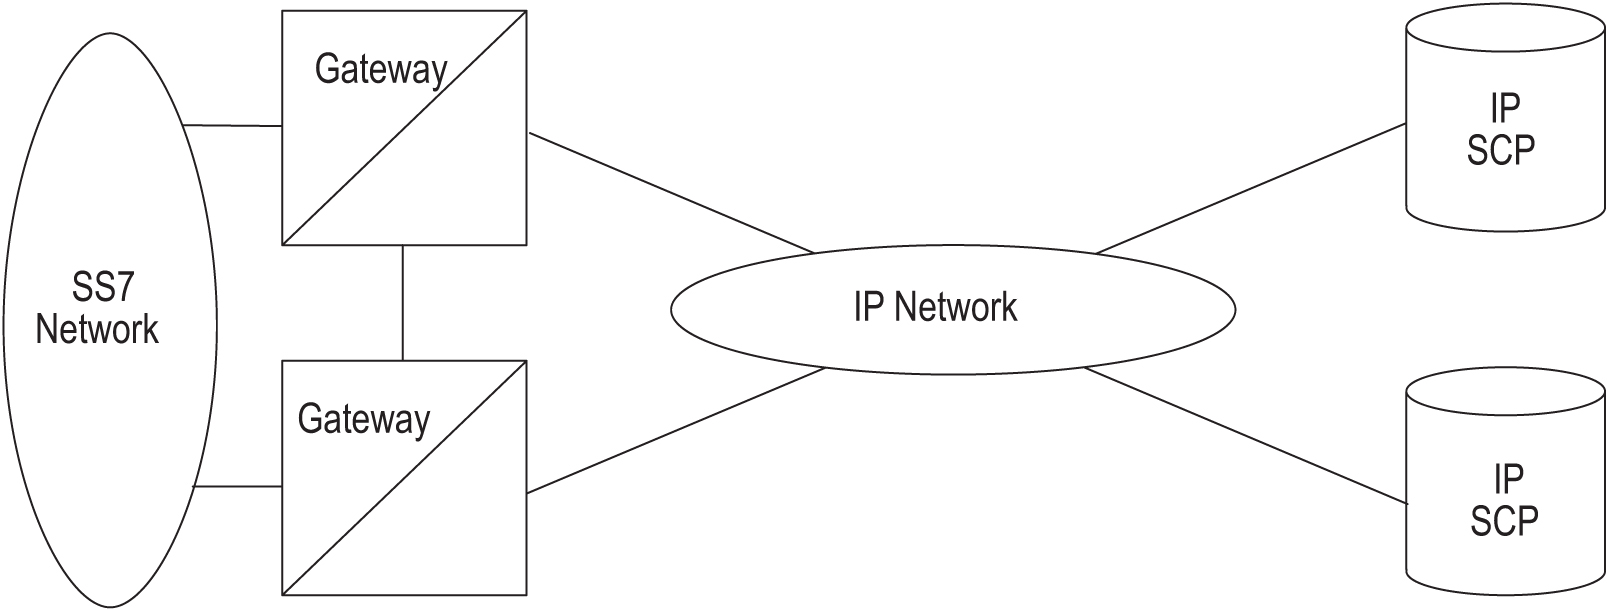 img/c_non_sccp_isup_routing_ip7_release_2_0_prf-fig1.jpg